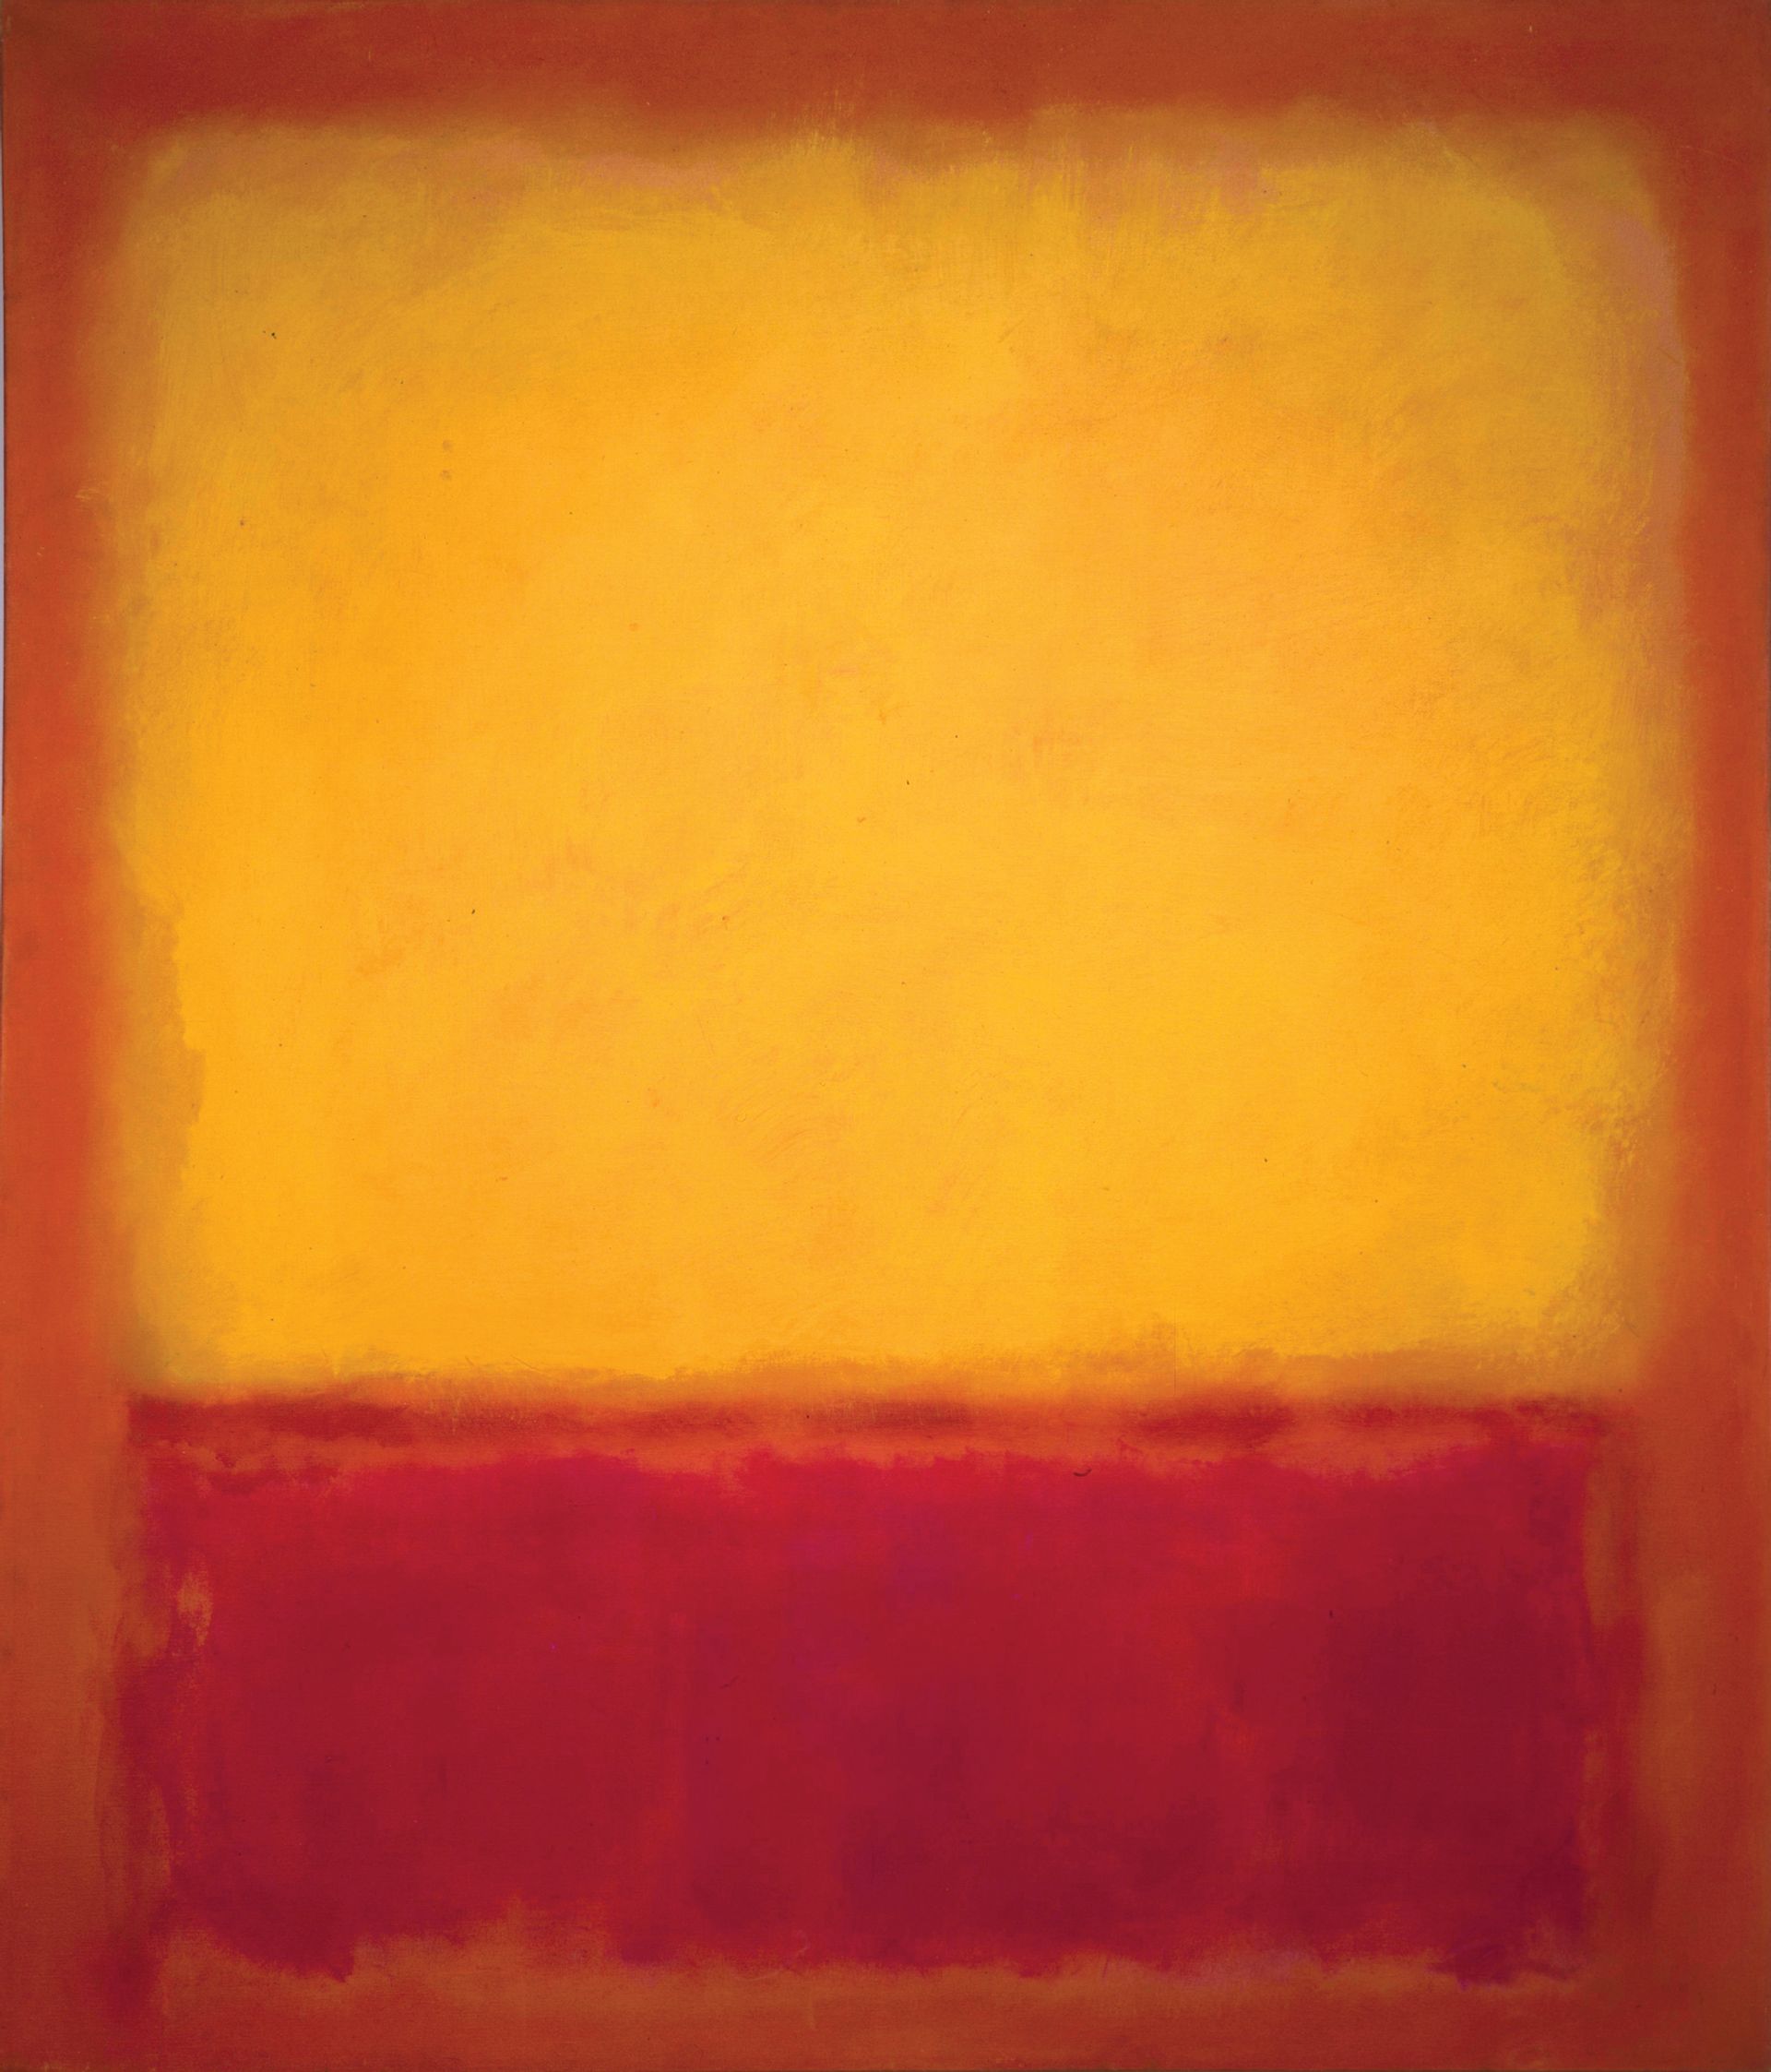 What Mark Rothko learned in Europe